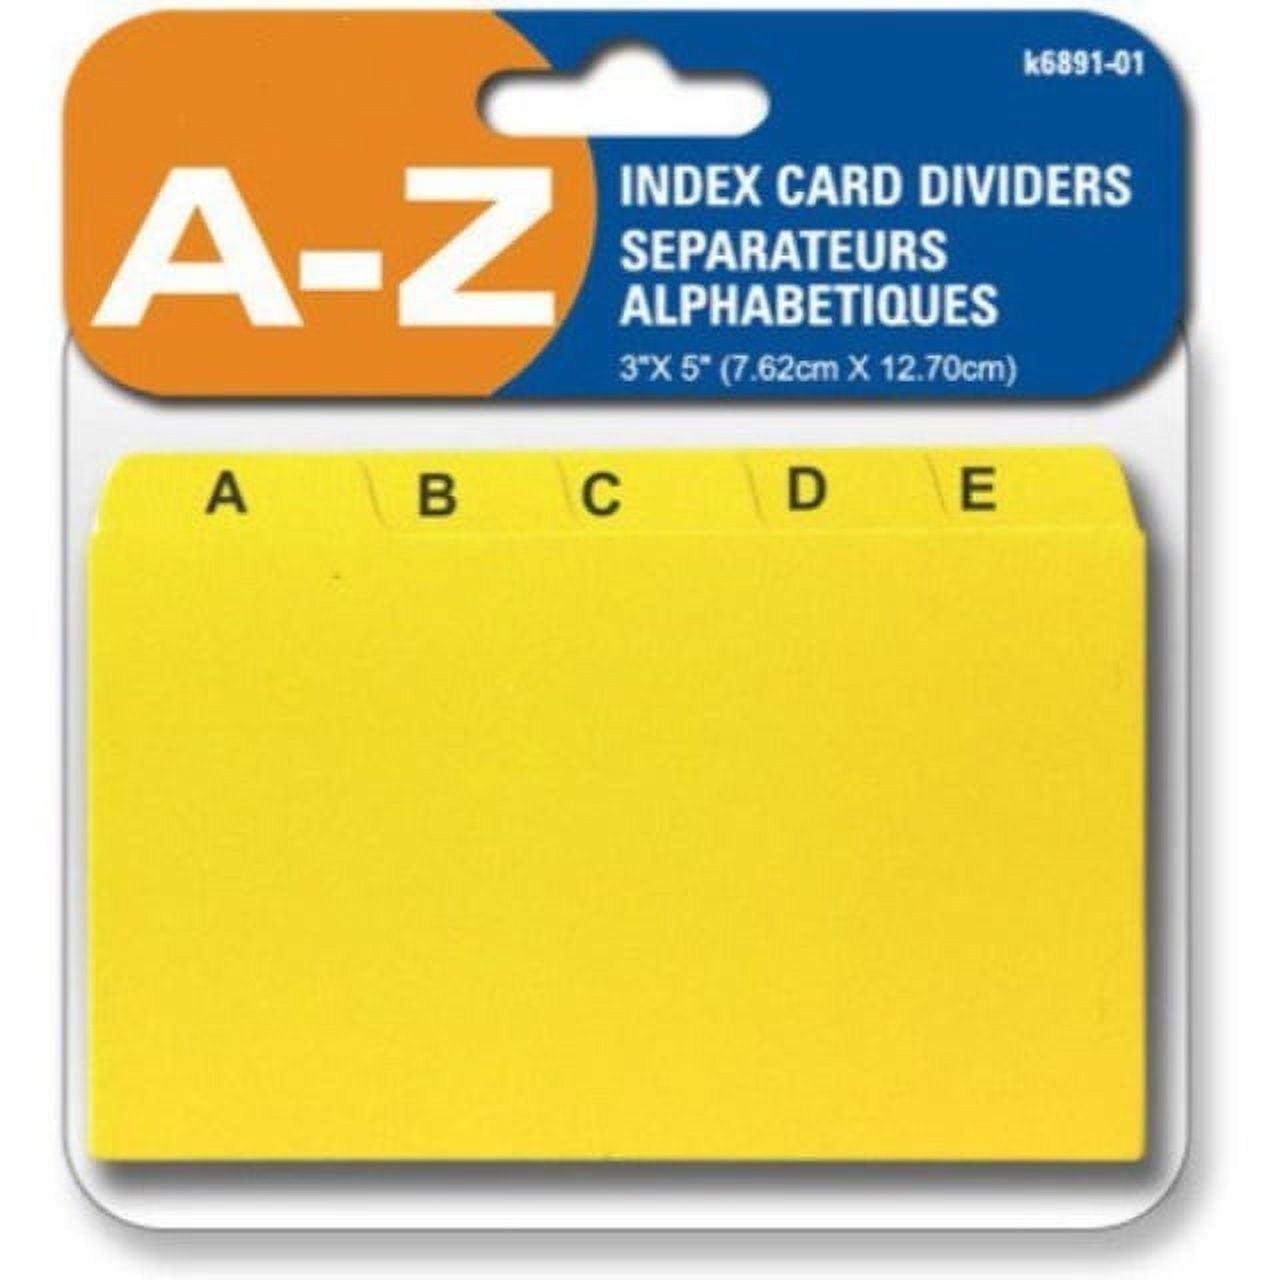 Card Dividers